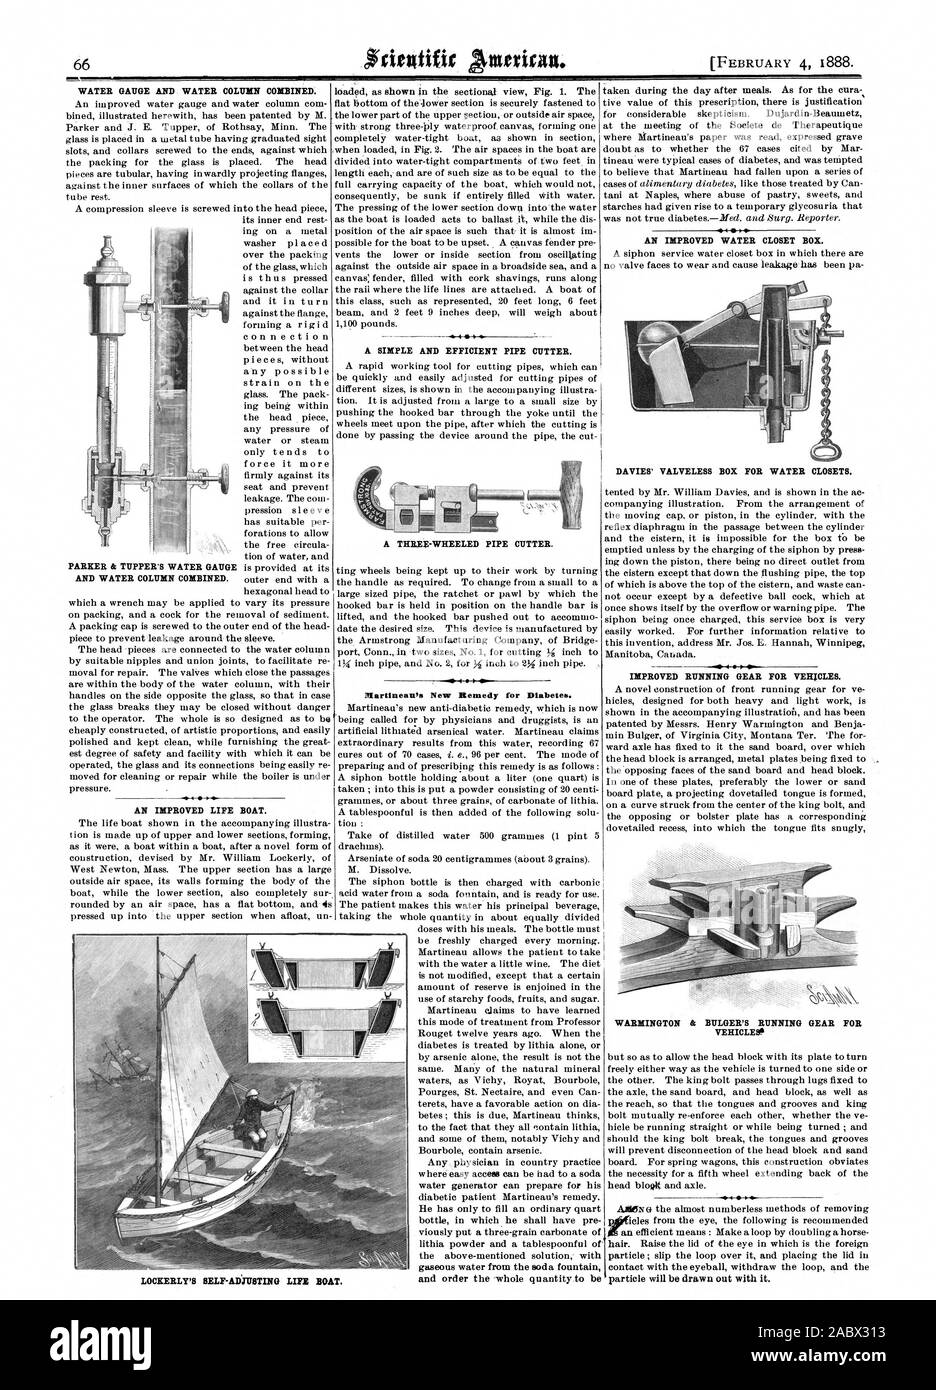 WATER GAUGE AND WATER COLUMN COMBINED. AN IMPROVED LIFE BOAT. A SIMPLE AND EFFICIENT PIPE CUTTER. Martineau's New Remedy for Diabetes. AN IMPROVED WATER CLOSET BOX. DAVIES' VALVELESS BOX FOR WATER CLOSETS. 4  IMPROVED RUNNING GEAR FOR VEHICLES. WARBIINGTON & BULGER'S RUNNING GEAR FOR VEHICLES!, scientific american, 1888-02-04 Stock Photo